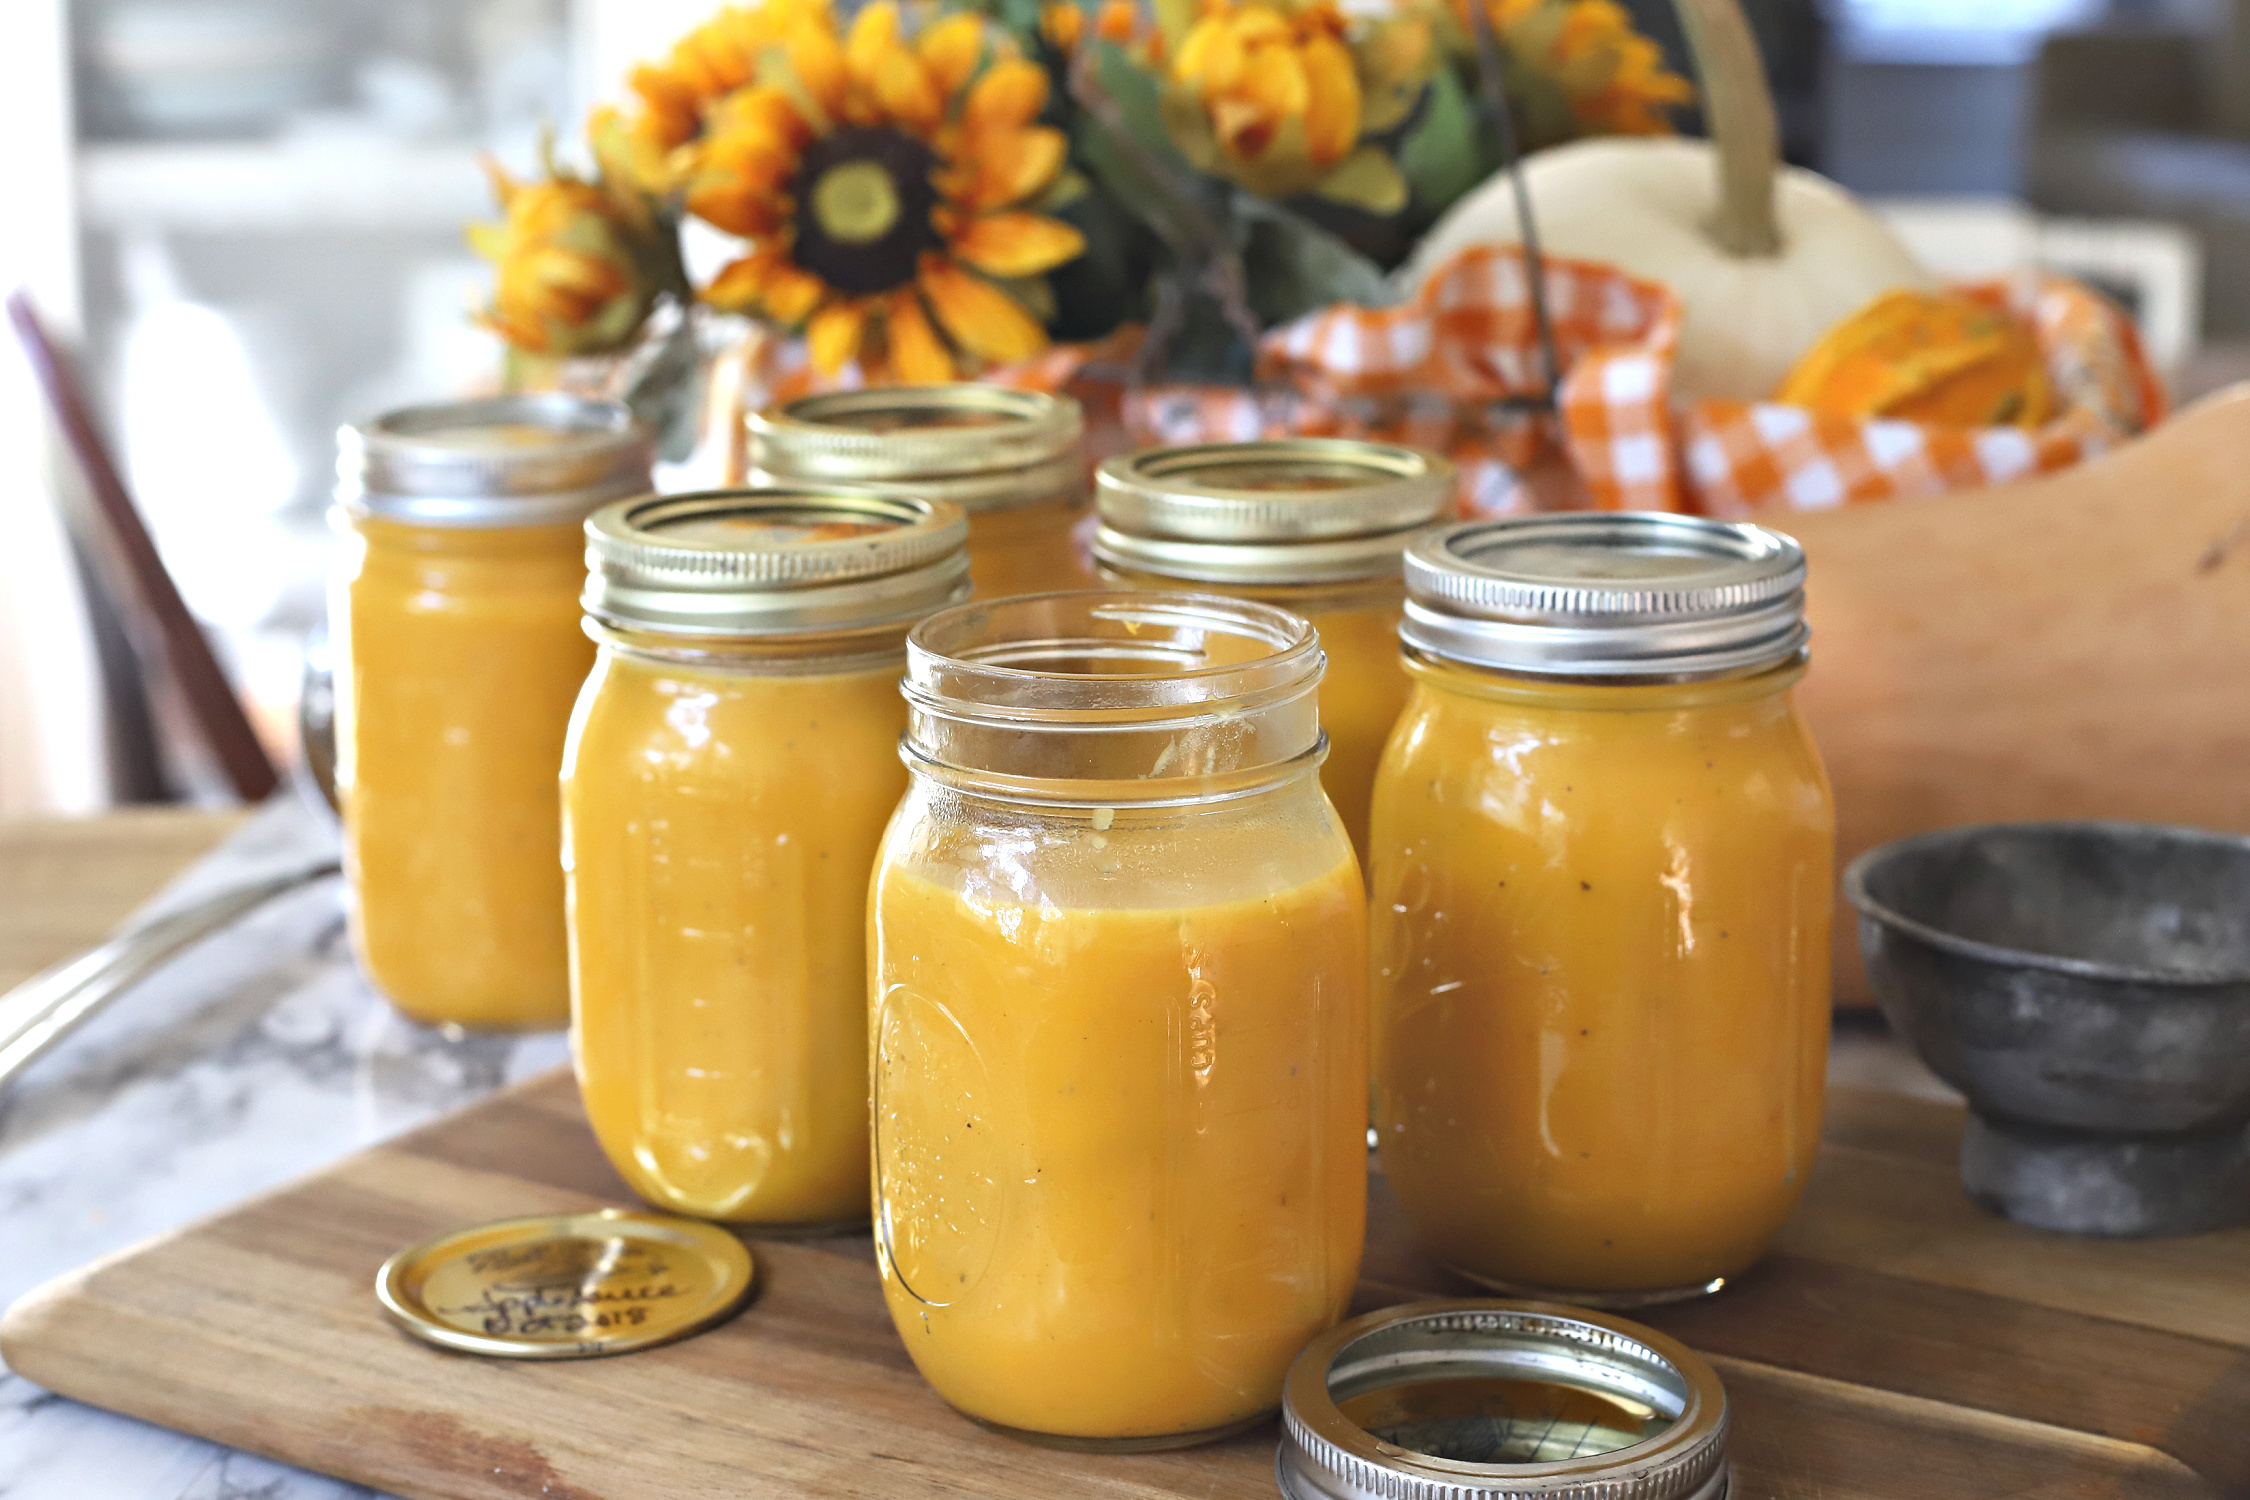 Serving and gifting butternut squash soup